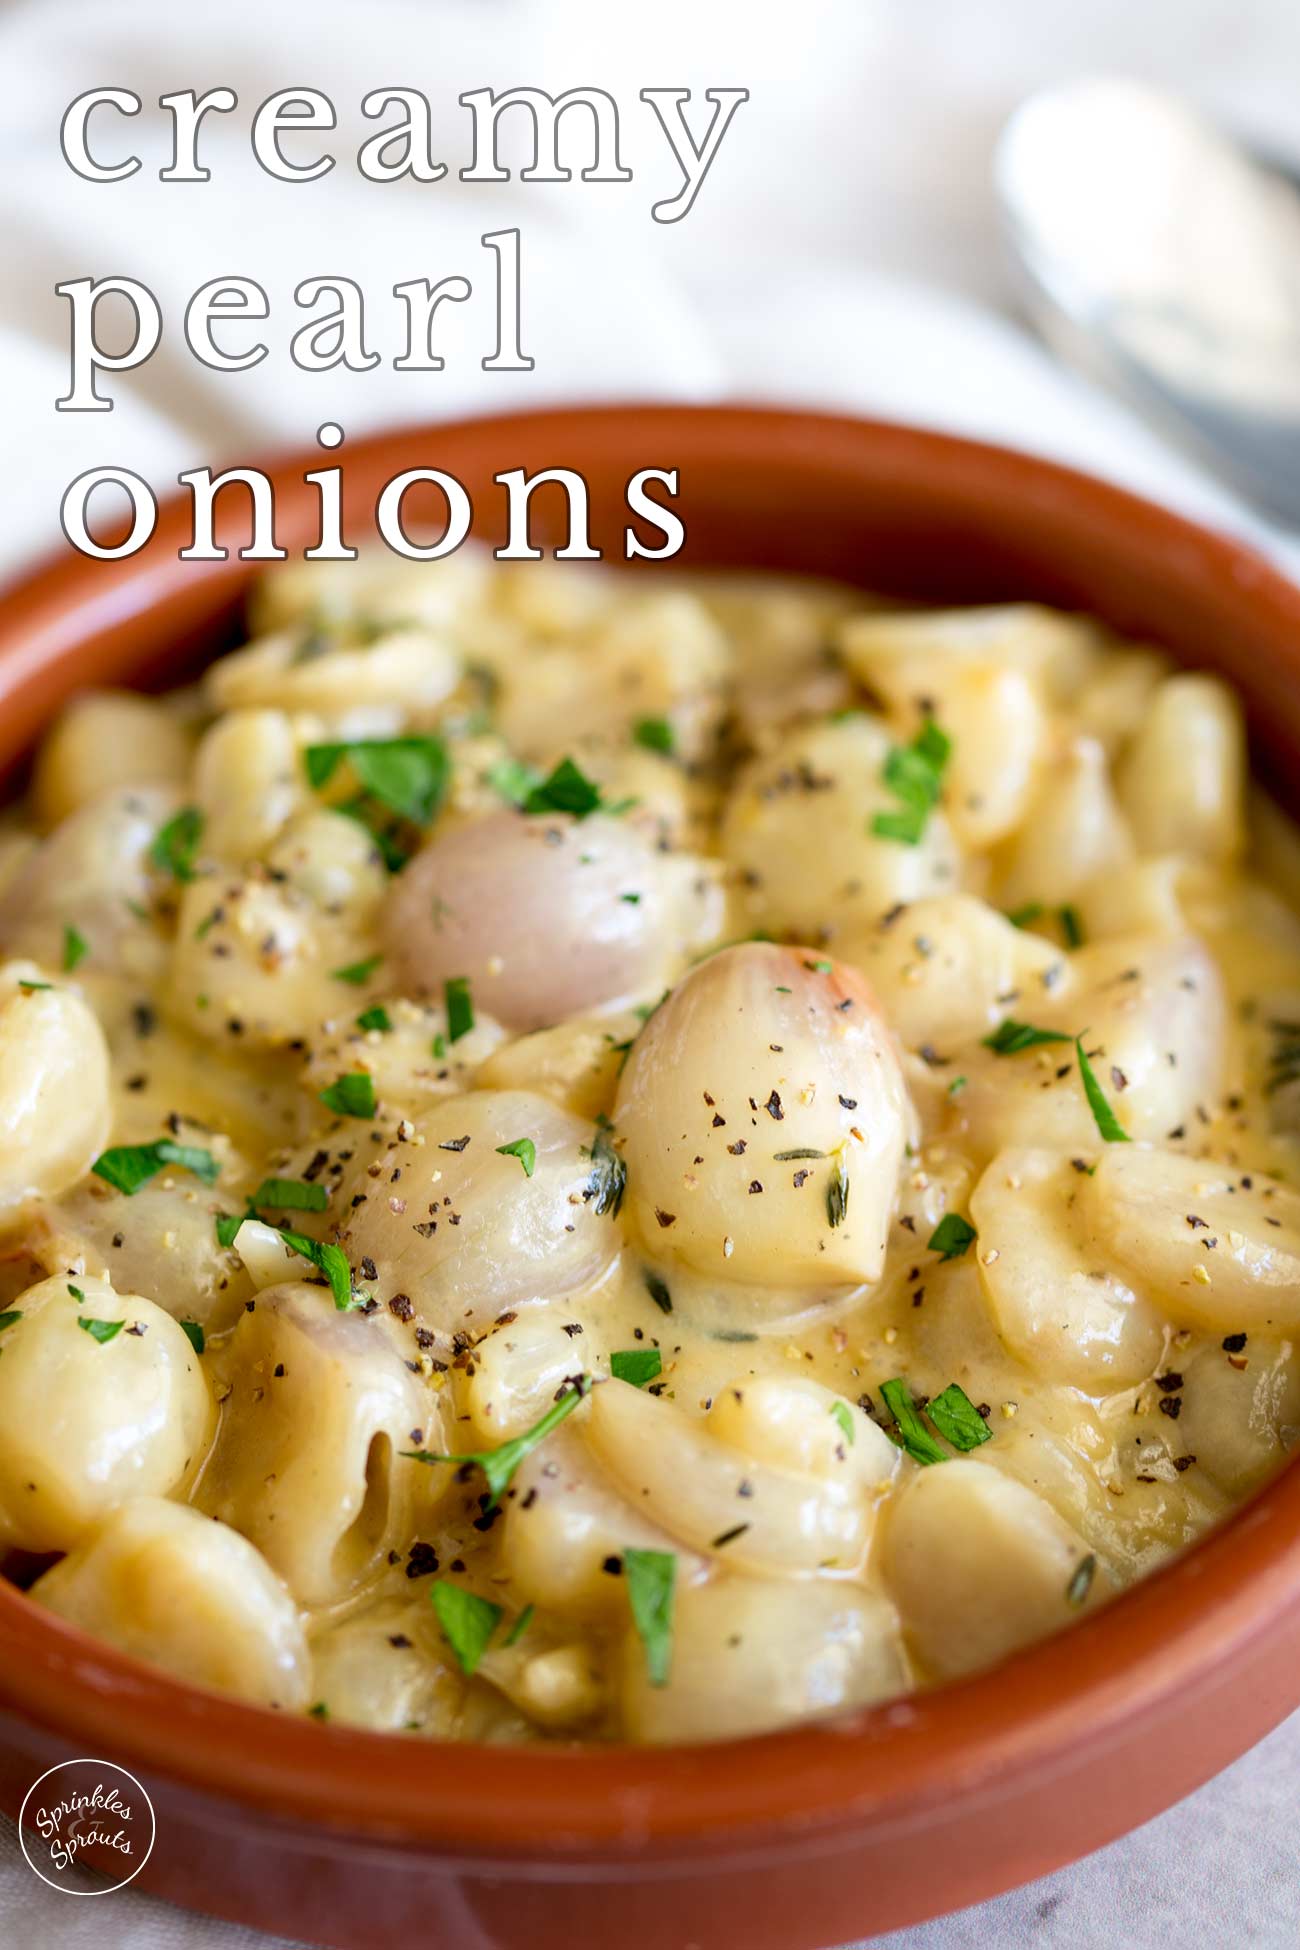 pin image: terracotta dish of baby onions in a cream sauce with text overlaid